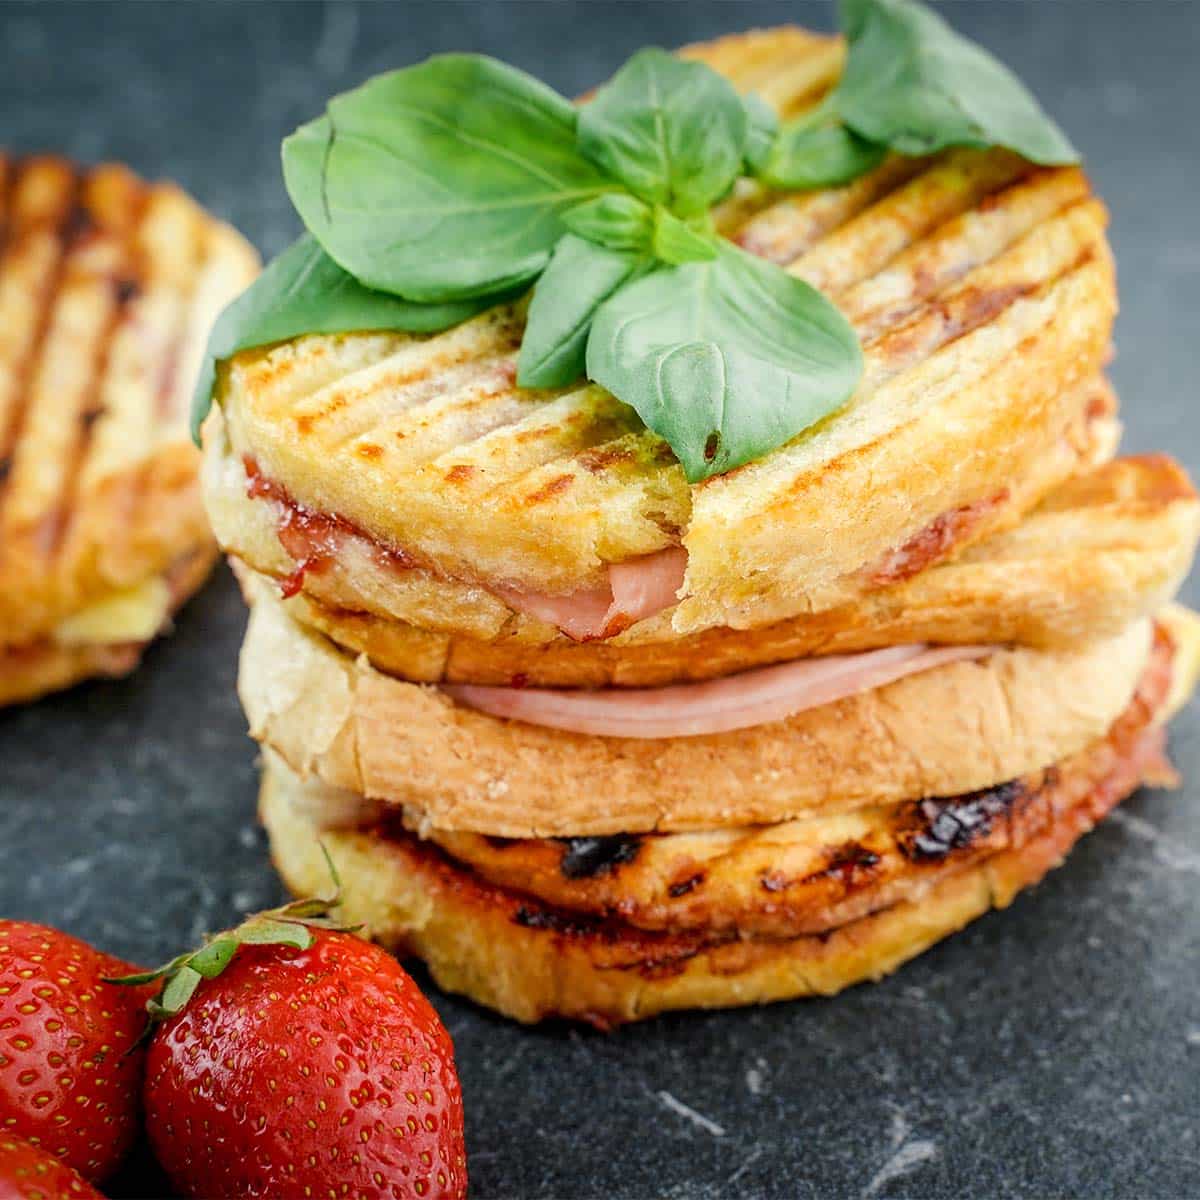 Brie grilled cheese sandwich, with basil on top and strawberries on the side.